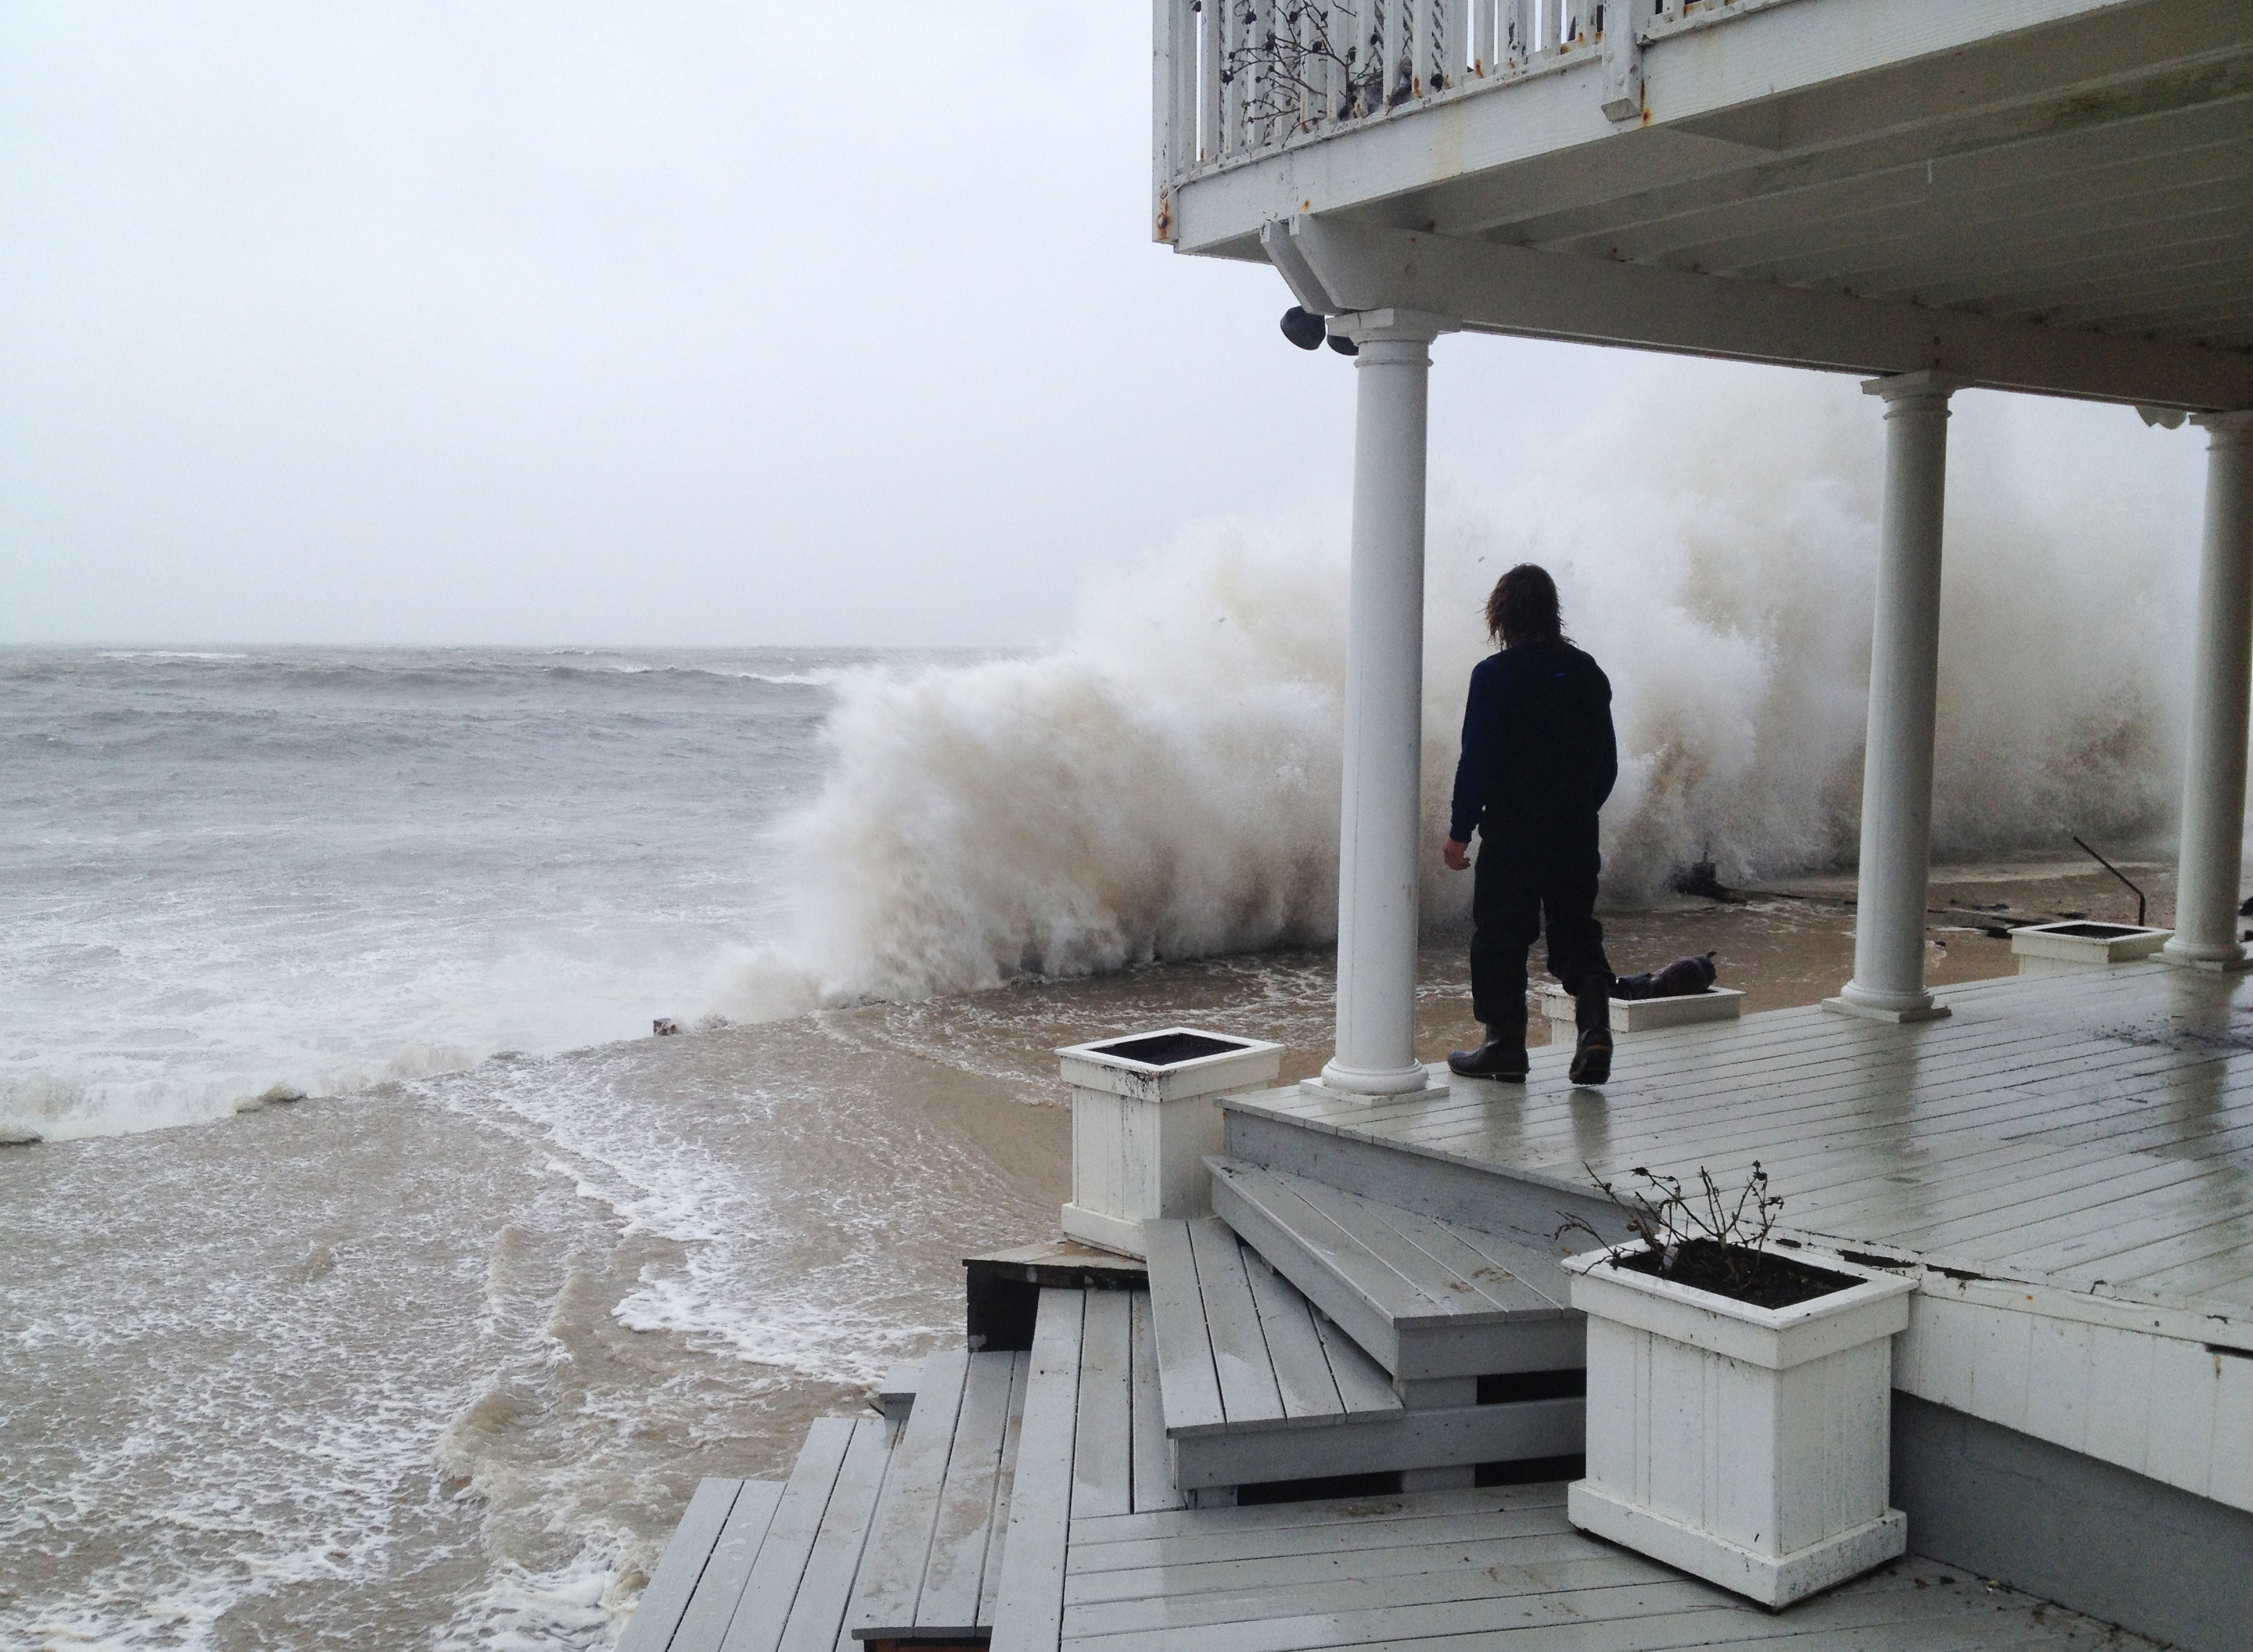 A wave crashes against the shore while person stands on a porch as Hurricane Sandy moves up the coast October 29, 2012 in Montauk, New York. (Sheila Rooney&mdash;Getty Images)